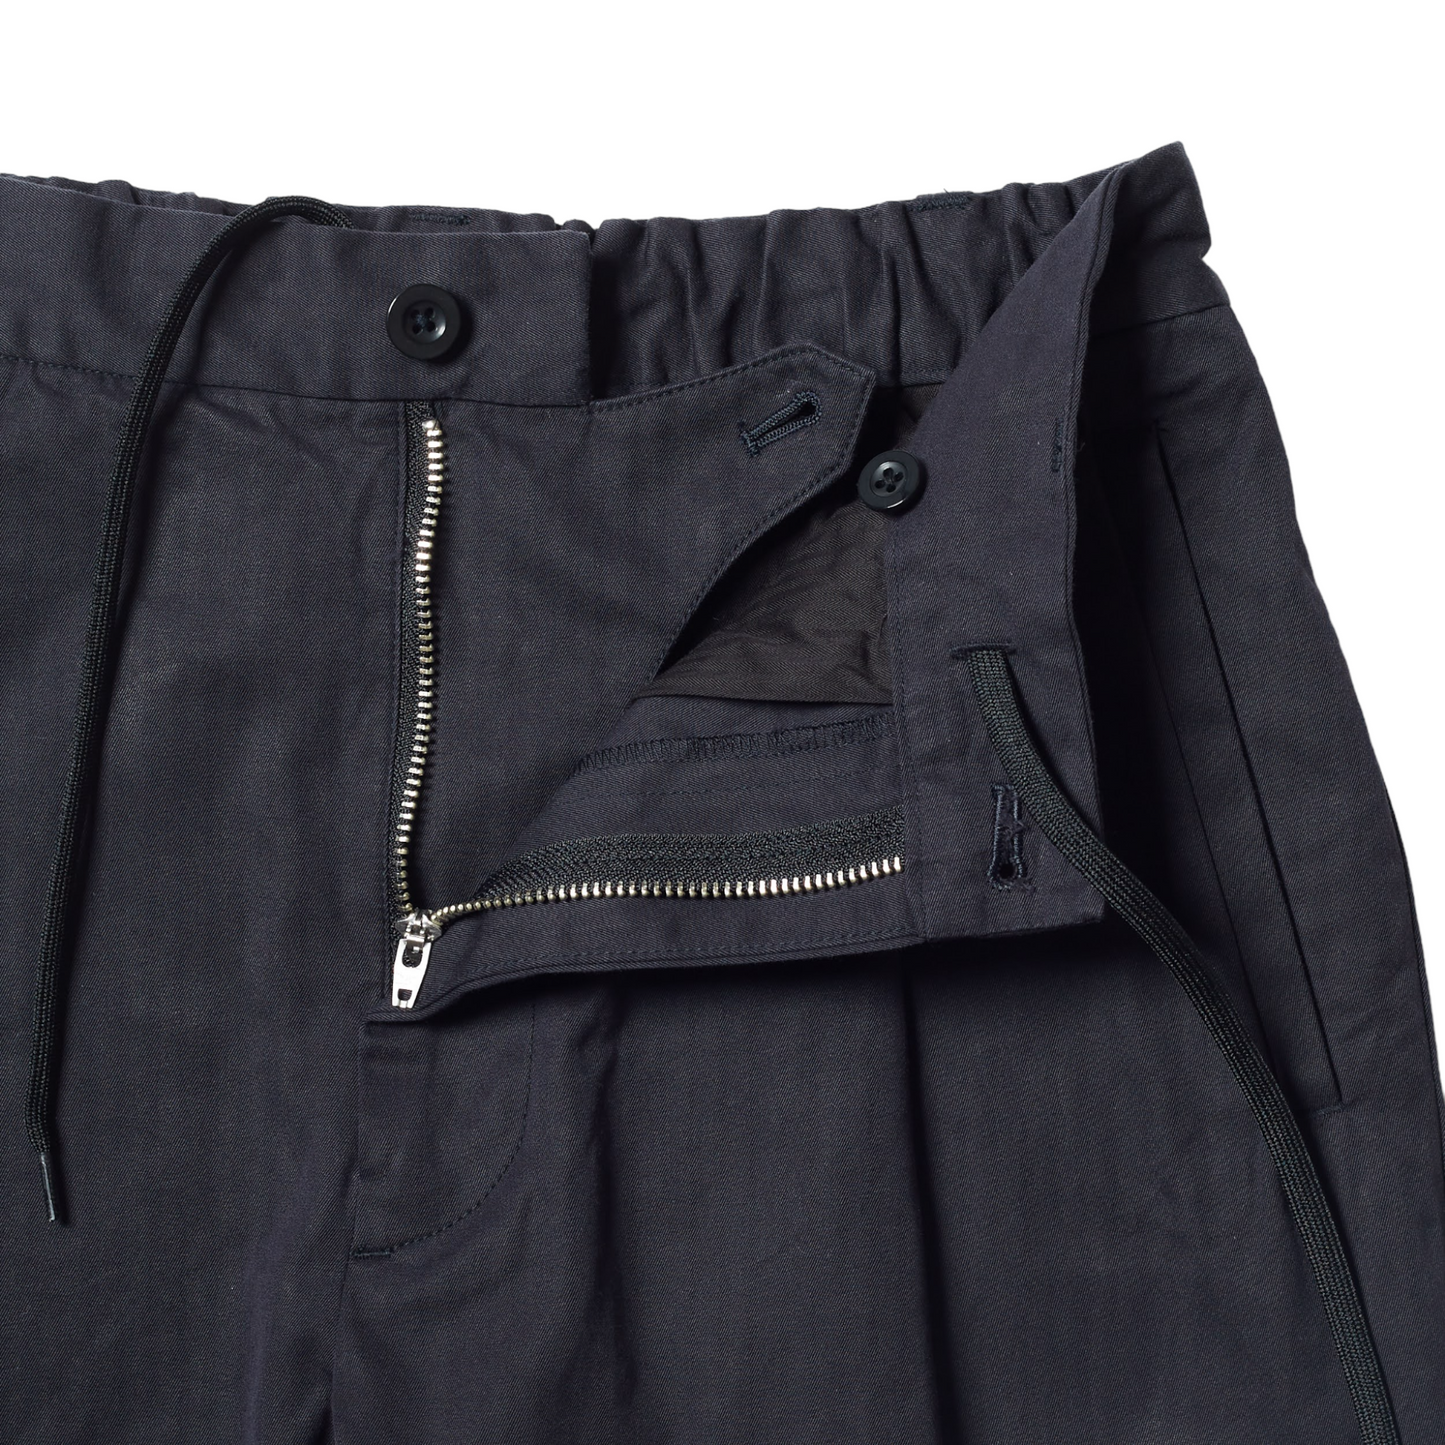 
                  
                    SUNNYSIDERS_*A VONTADE_One Tack Easy Trousers [VTD-0470-PT] DEEP NAVY_Trousers
                  
                